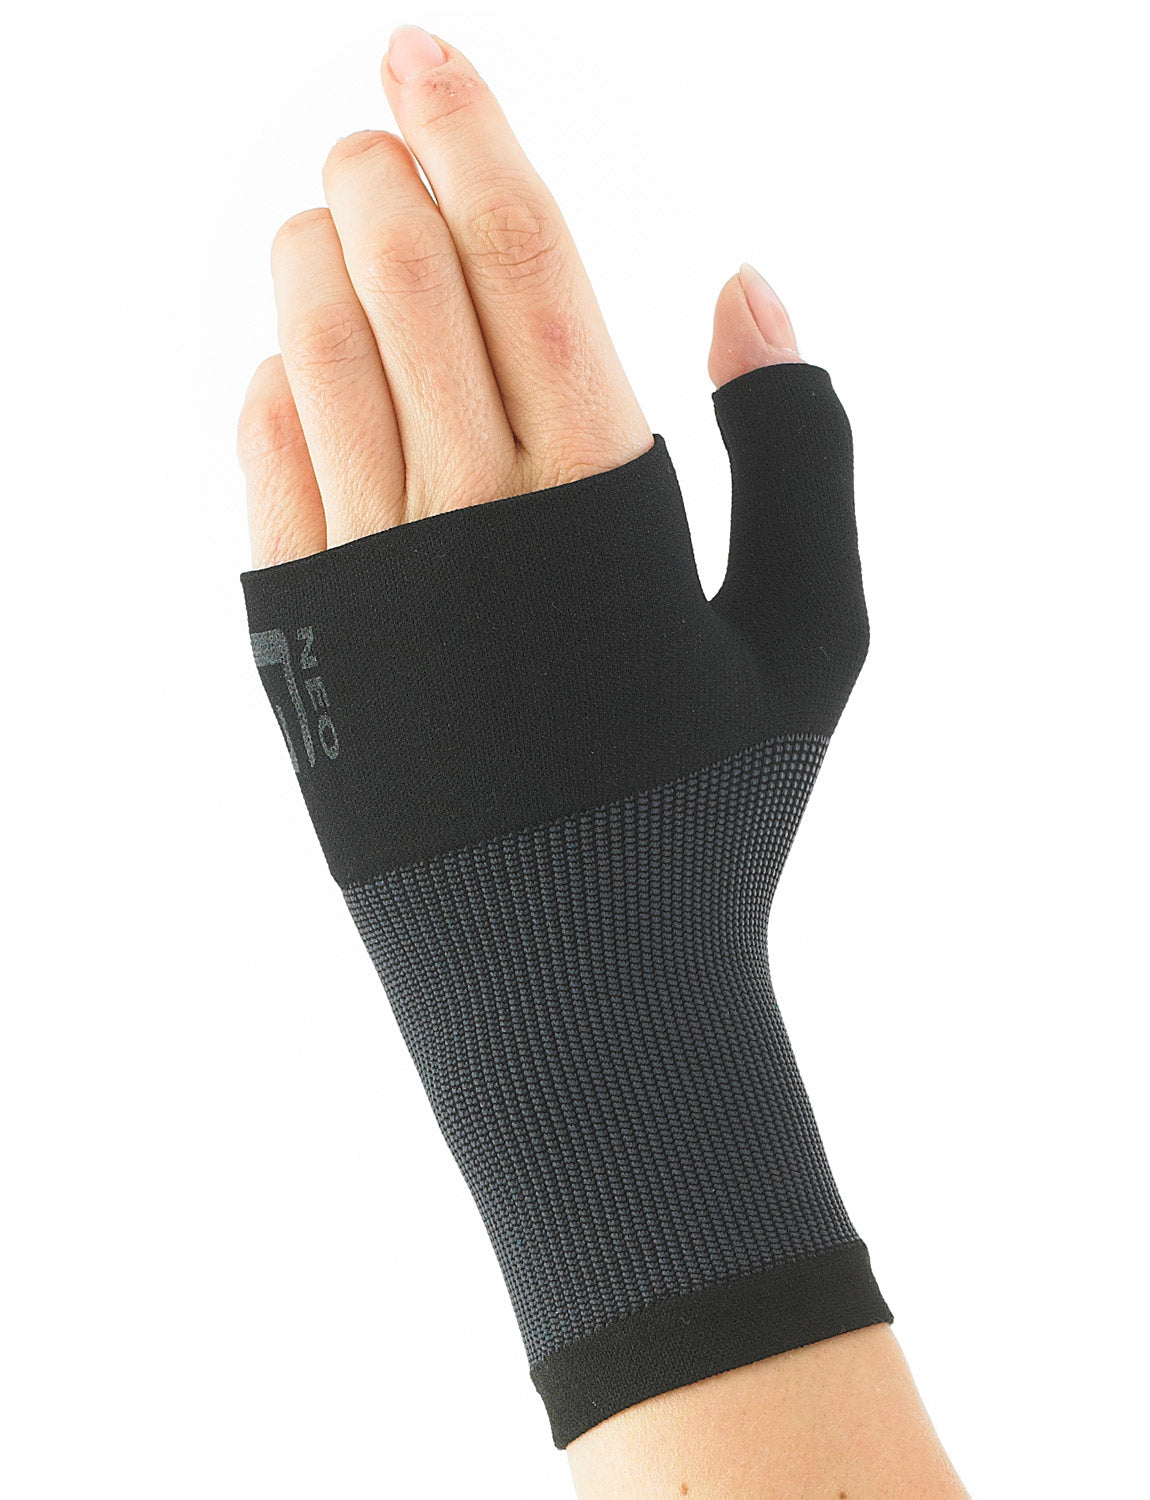 Neo G Airflow Wrist and Thumb Support 